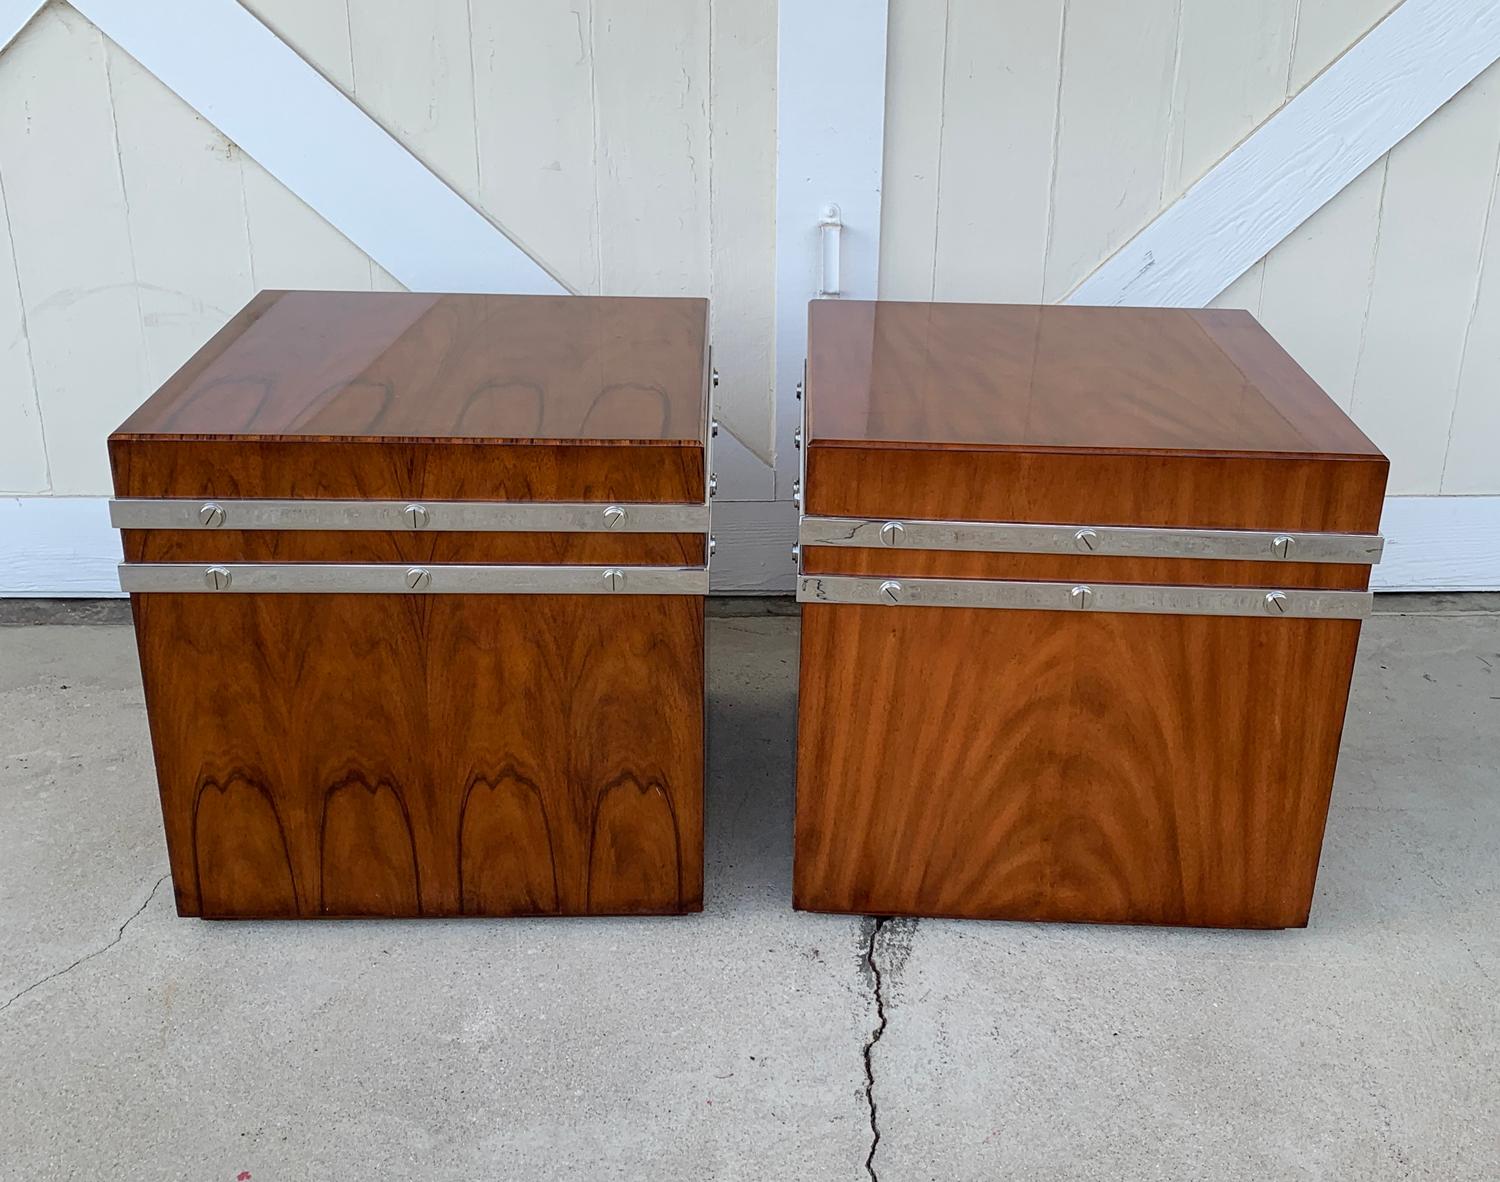 Nice pair of large cube tables/cabinets designed and manufactured by Theodore Alexander.
The cabinets are solidly built and with a chrome metal binding all around.
The pieces retain the original label.

The cabinets are in original condition and